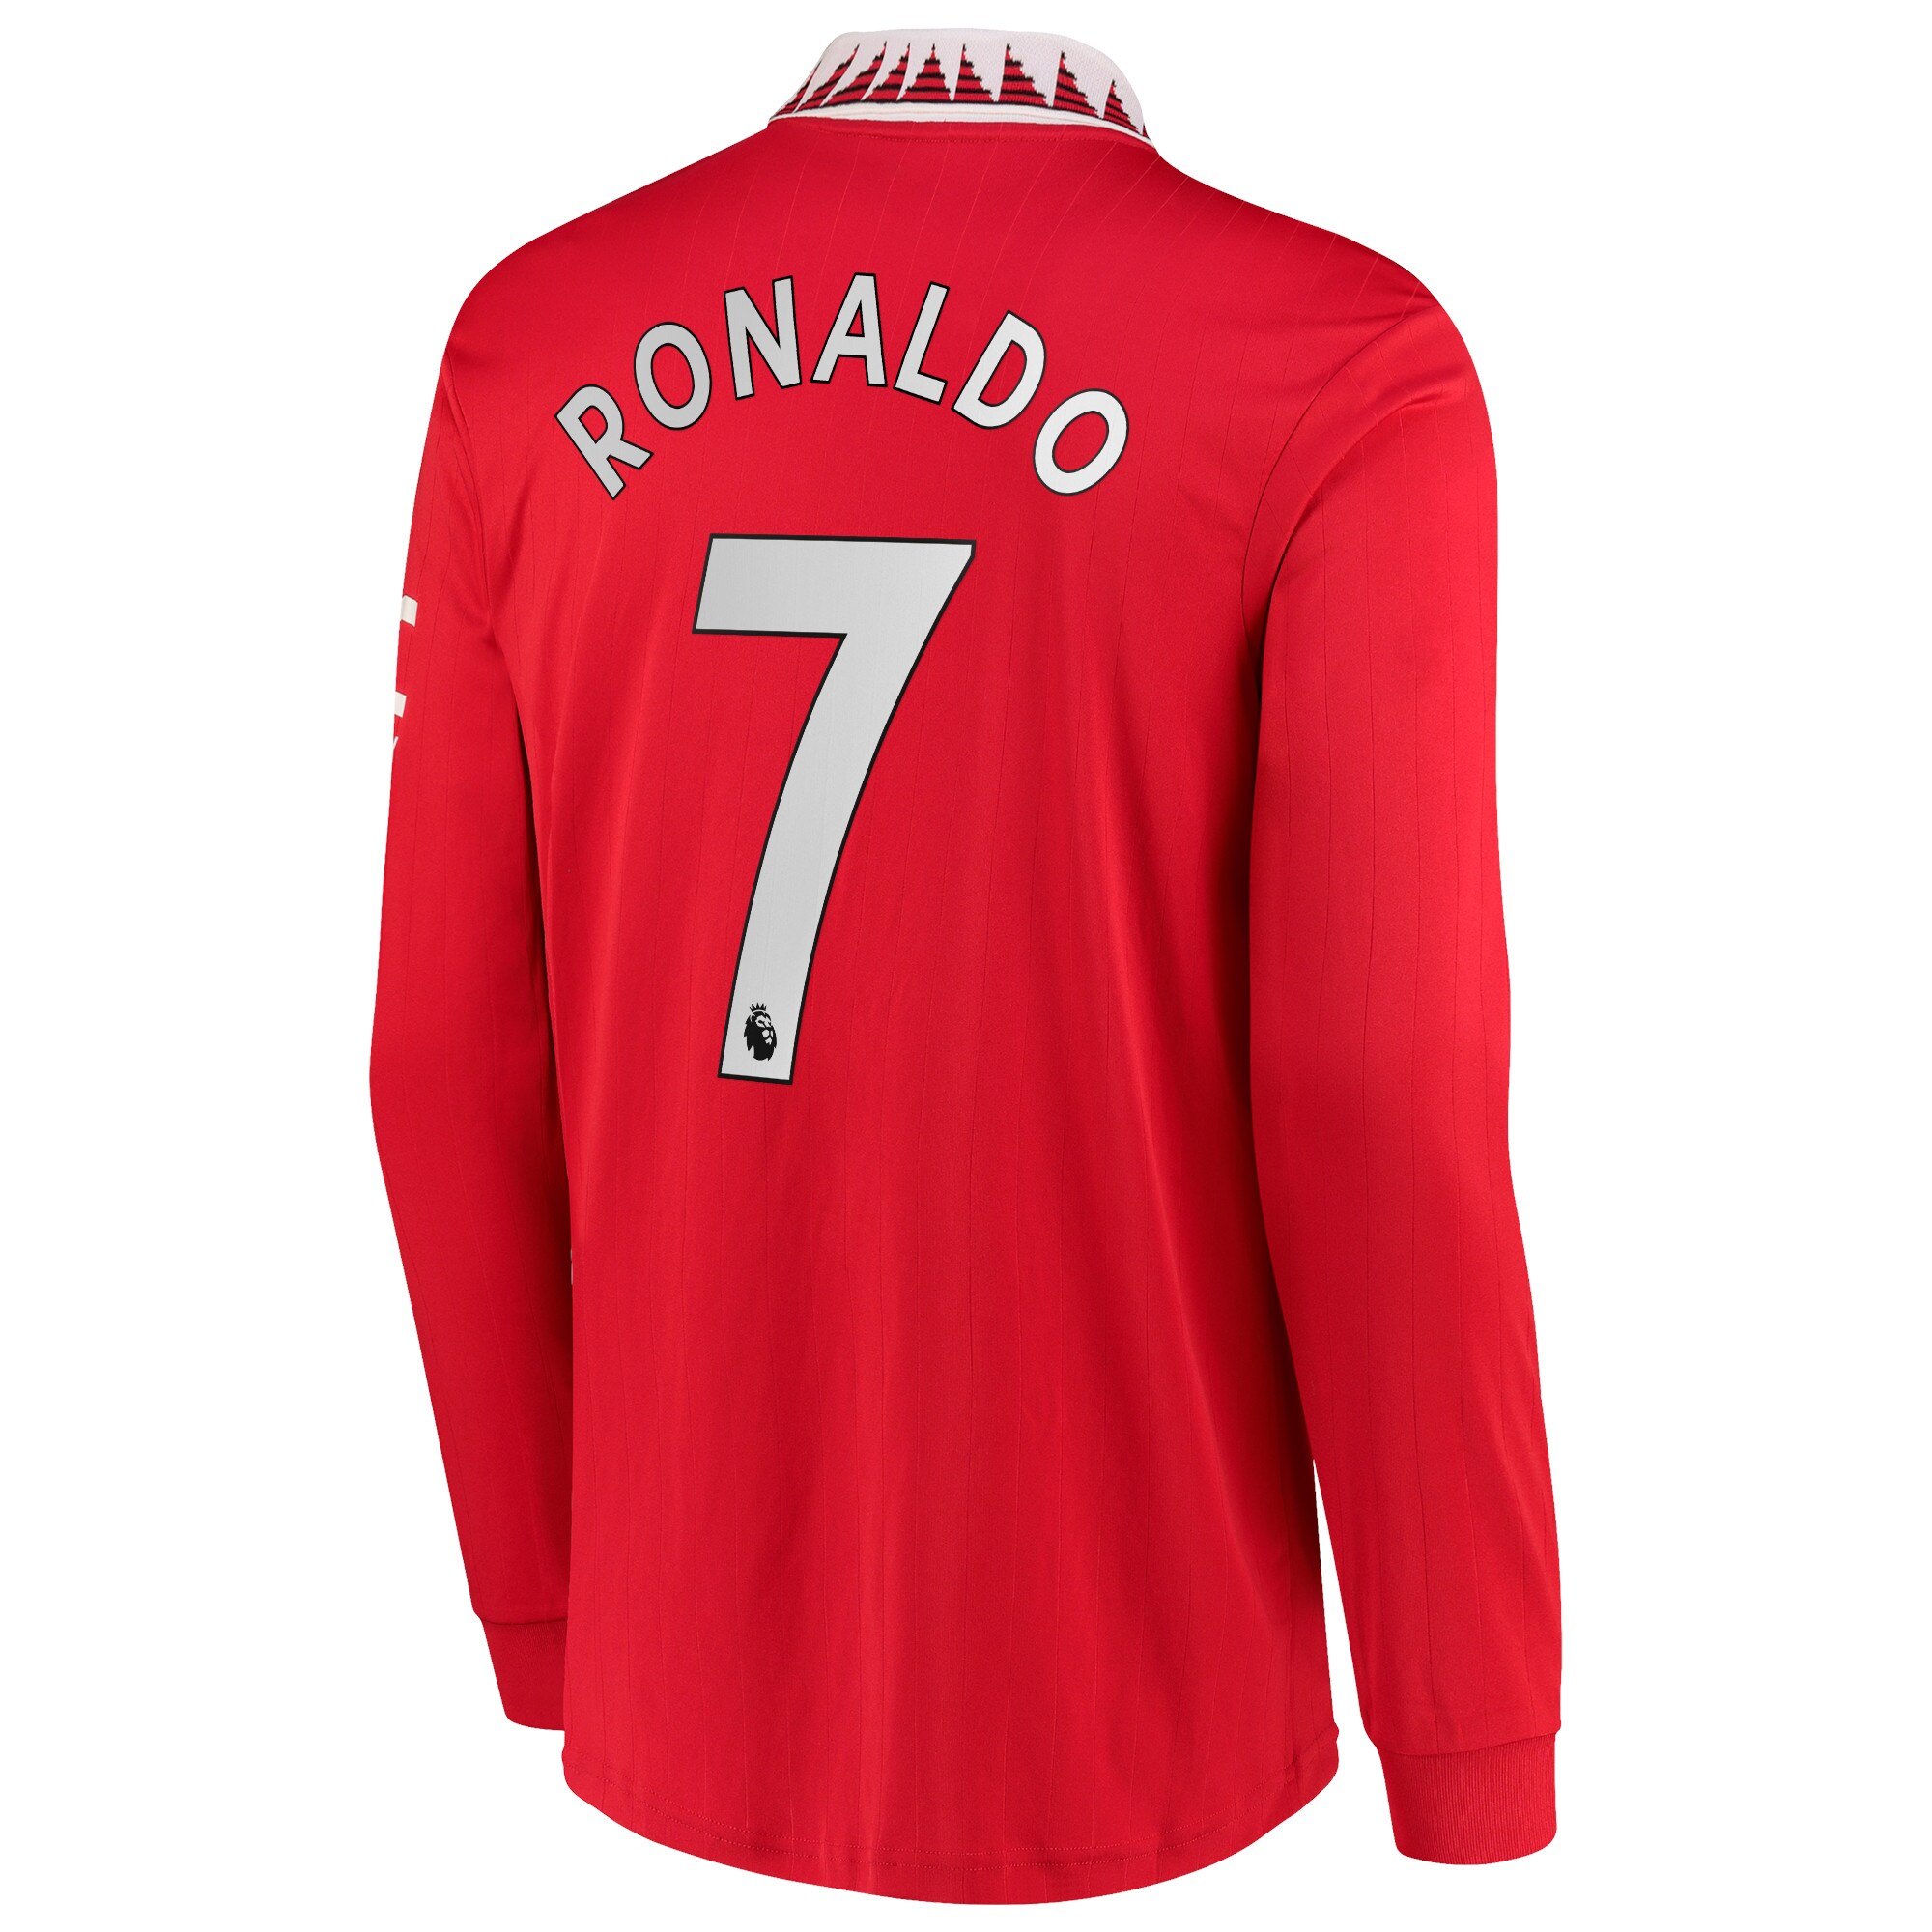 Youth RONALDO #7 Manchester United Jersey Kit 2021/22 Home